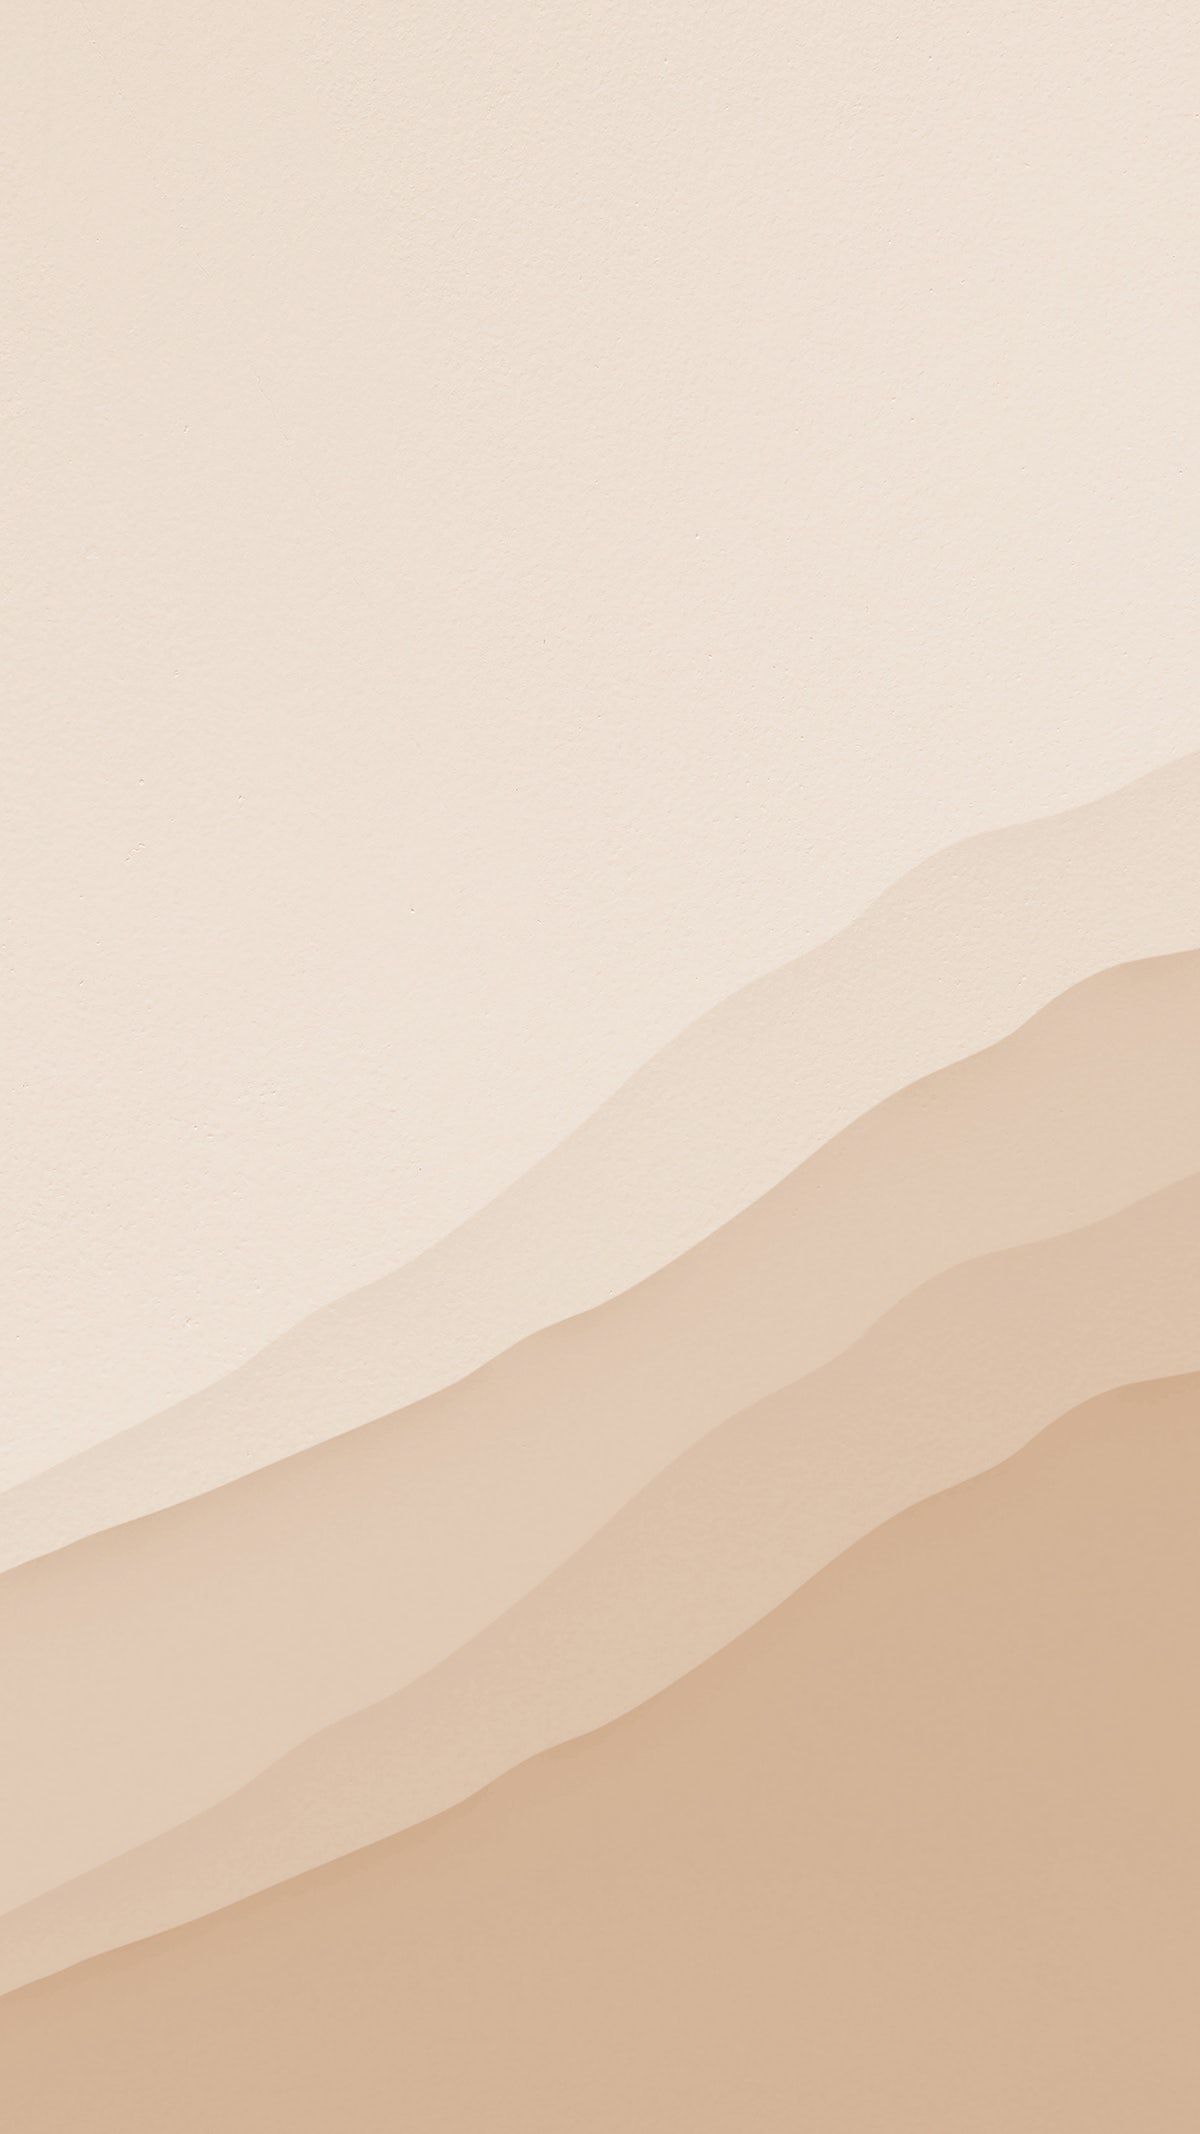 Illustration Of Abstract Beige Wallpaper Background